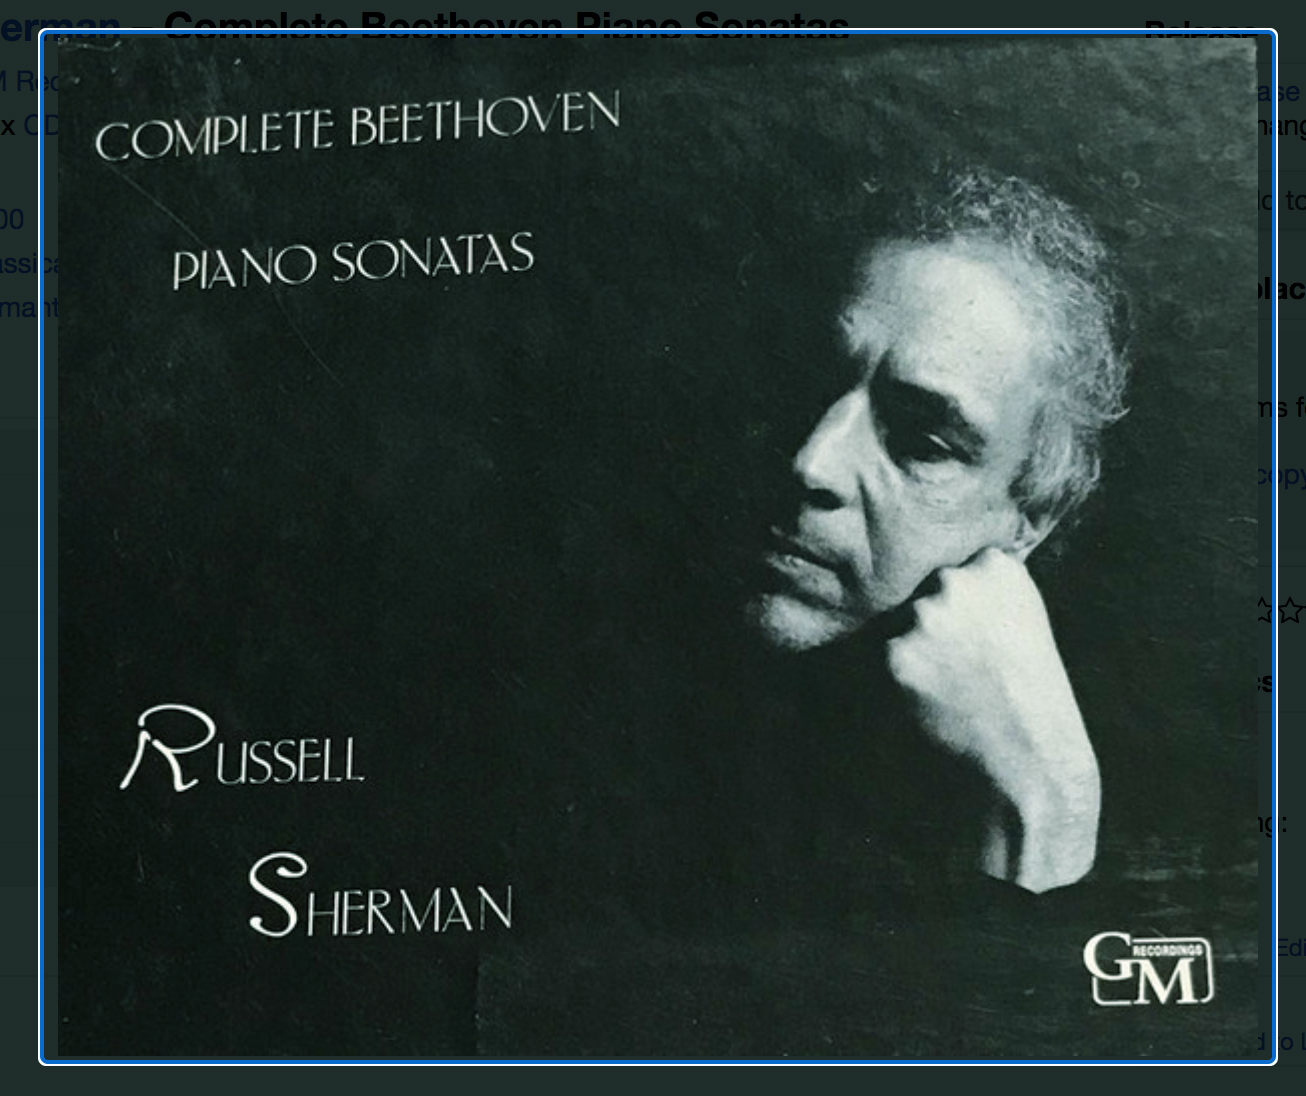 Sonatas　Piano　Sherman:　Beethoven　Complete　Russell　GM　Recordings　GM5001　–